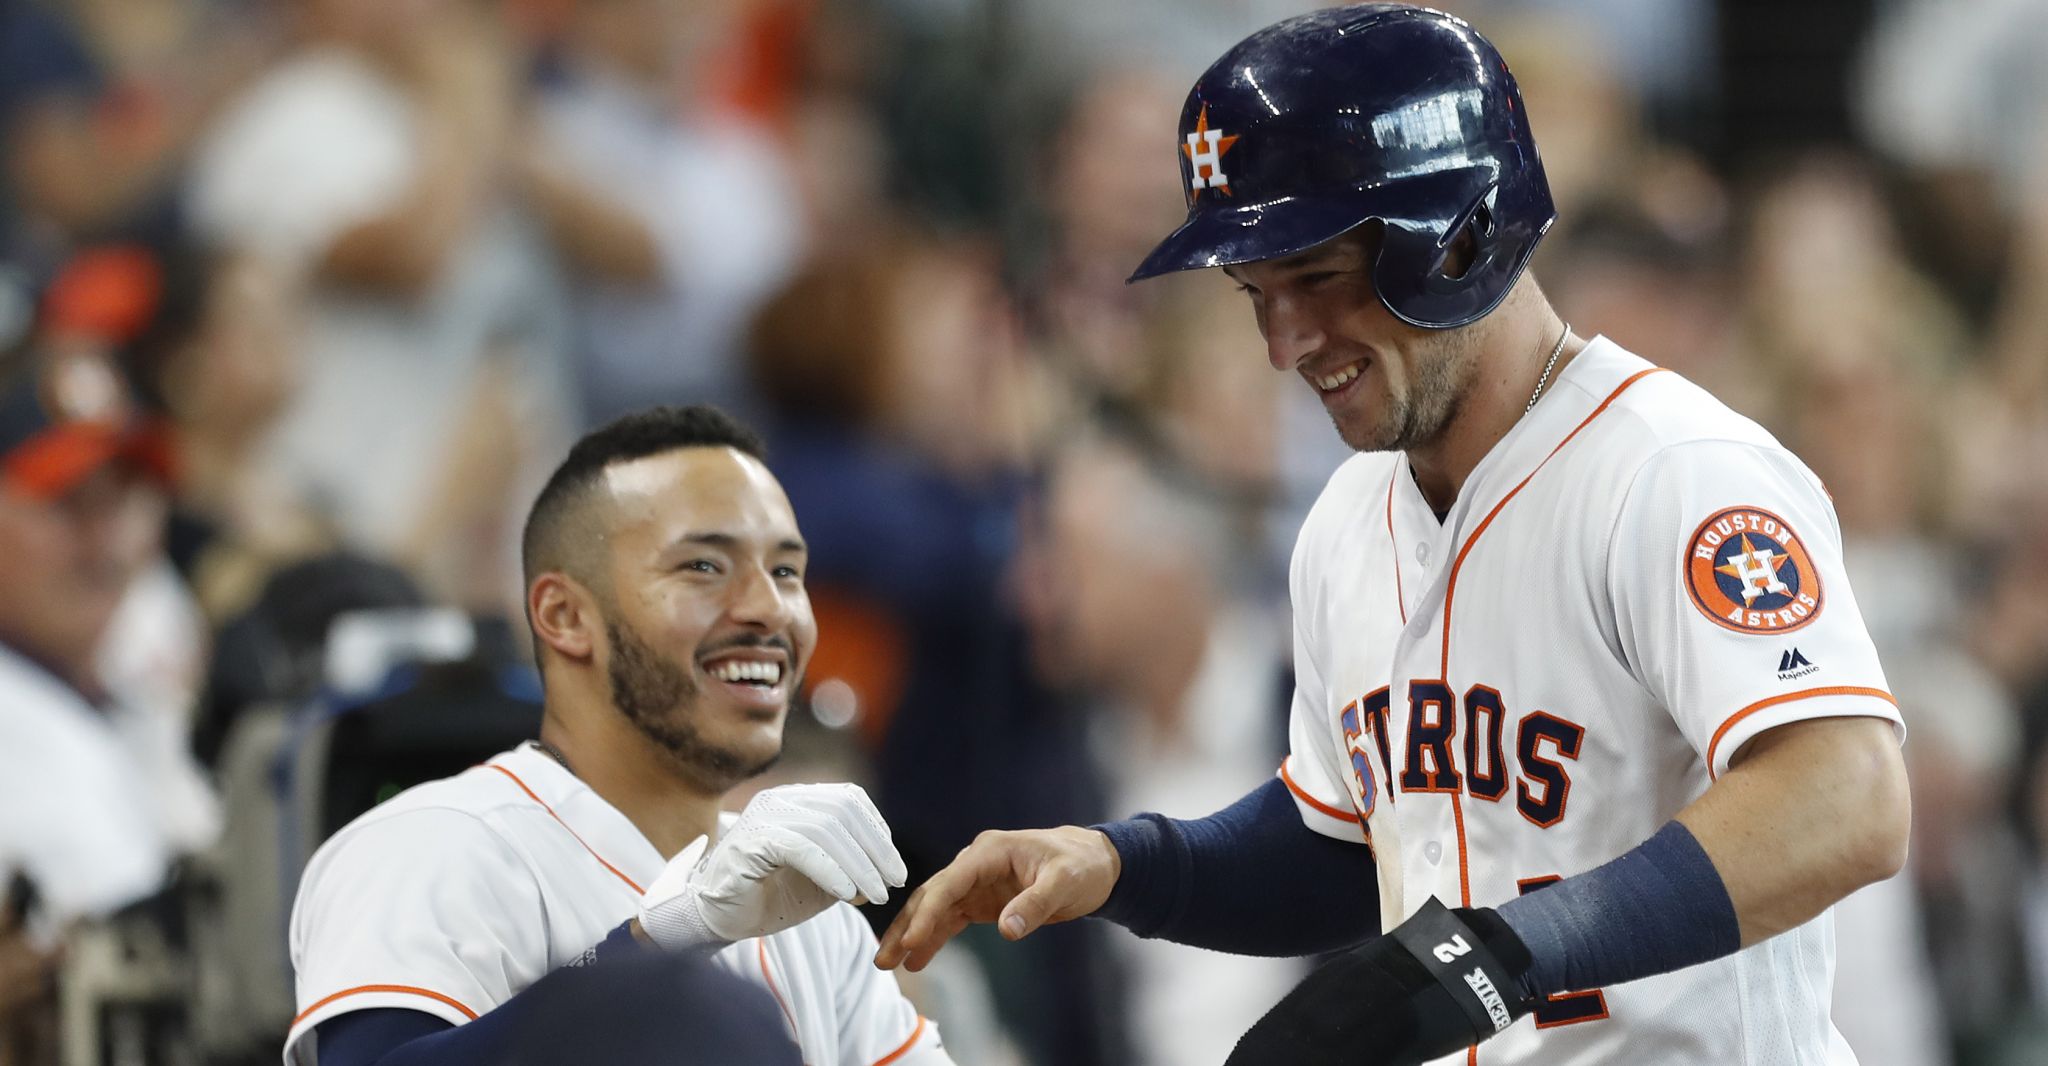 Carlos Correa's brother JC signs with Astros after turning down